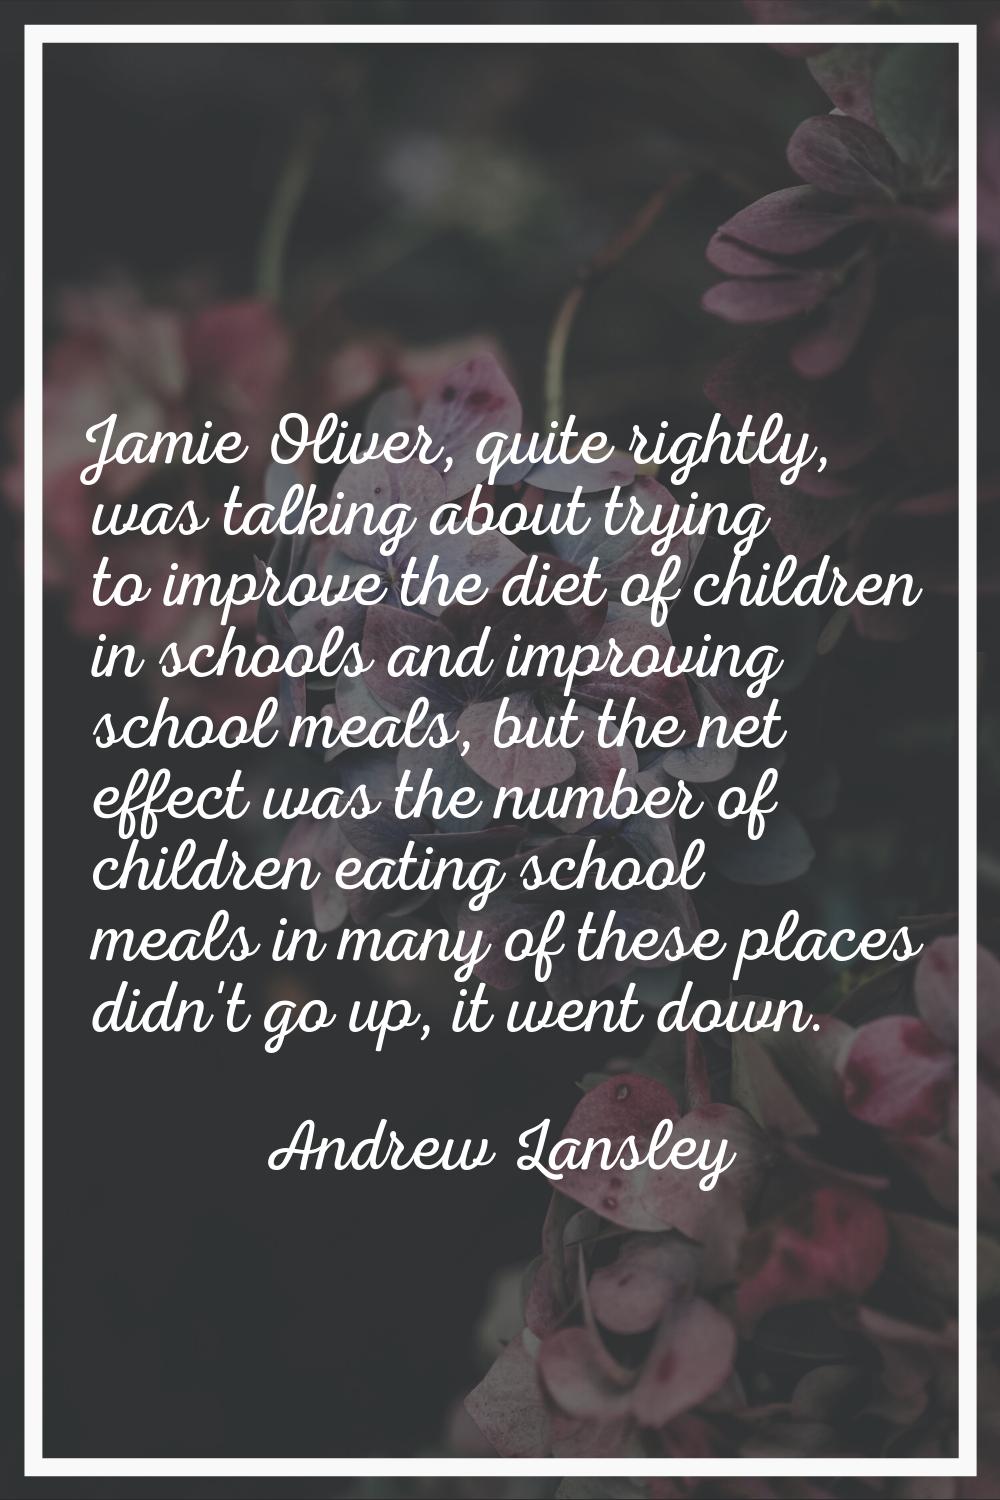 Jamie Oliver, quite rightly, was talking about trying to improve the diet of children in schools an